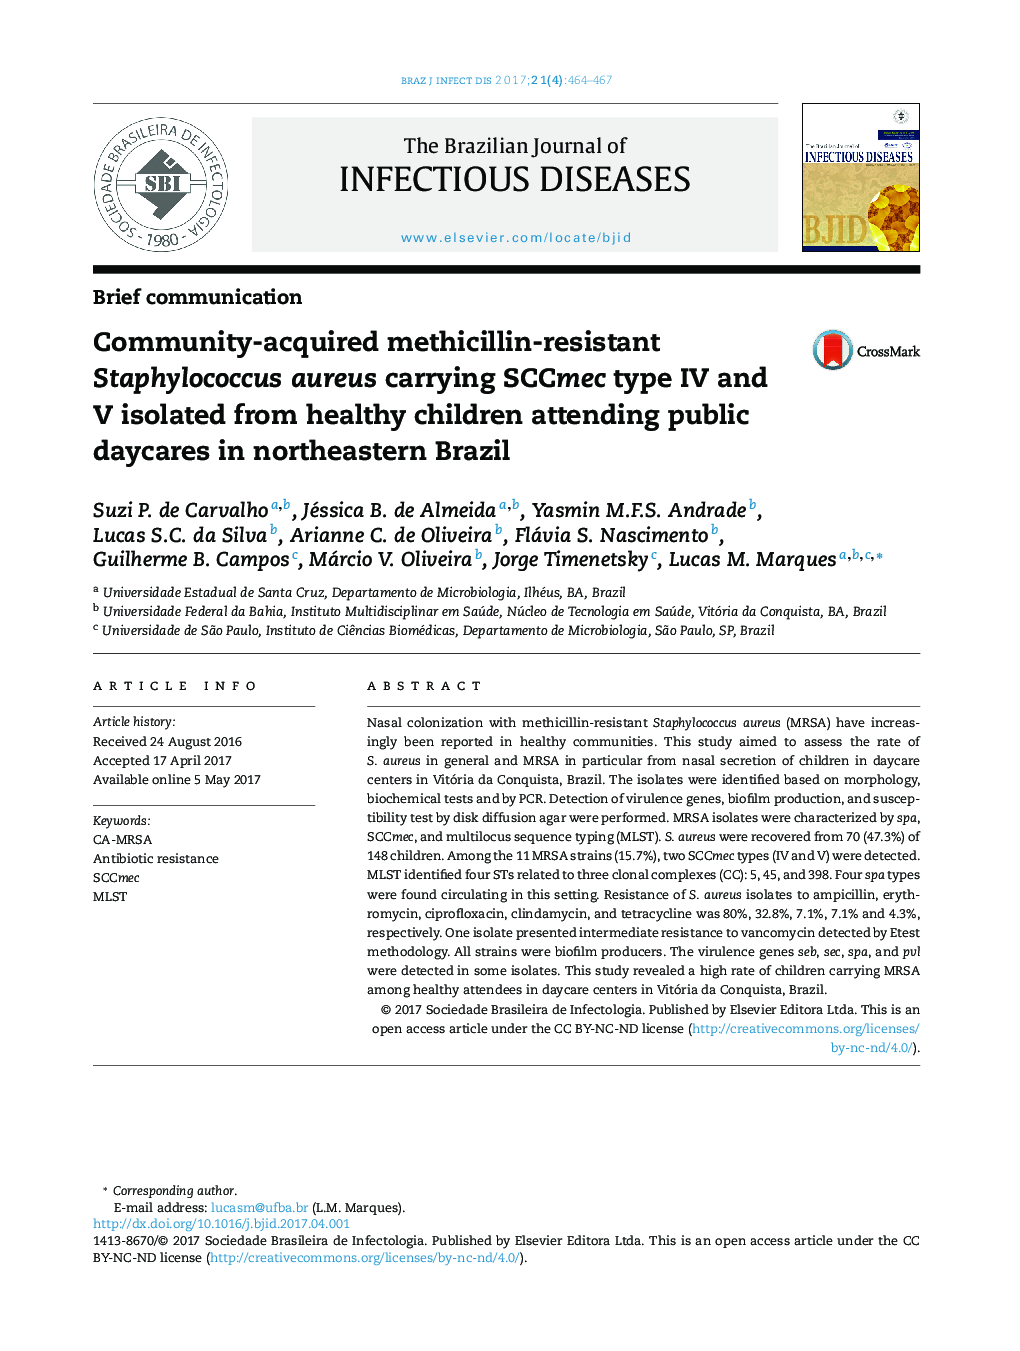 Community-acquired methicillin-resistant Staphylococcus aureus carrying SCCmec type IV and V isolated from healthy children attending public daycares in northeastern Brazil